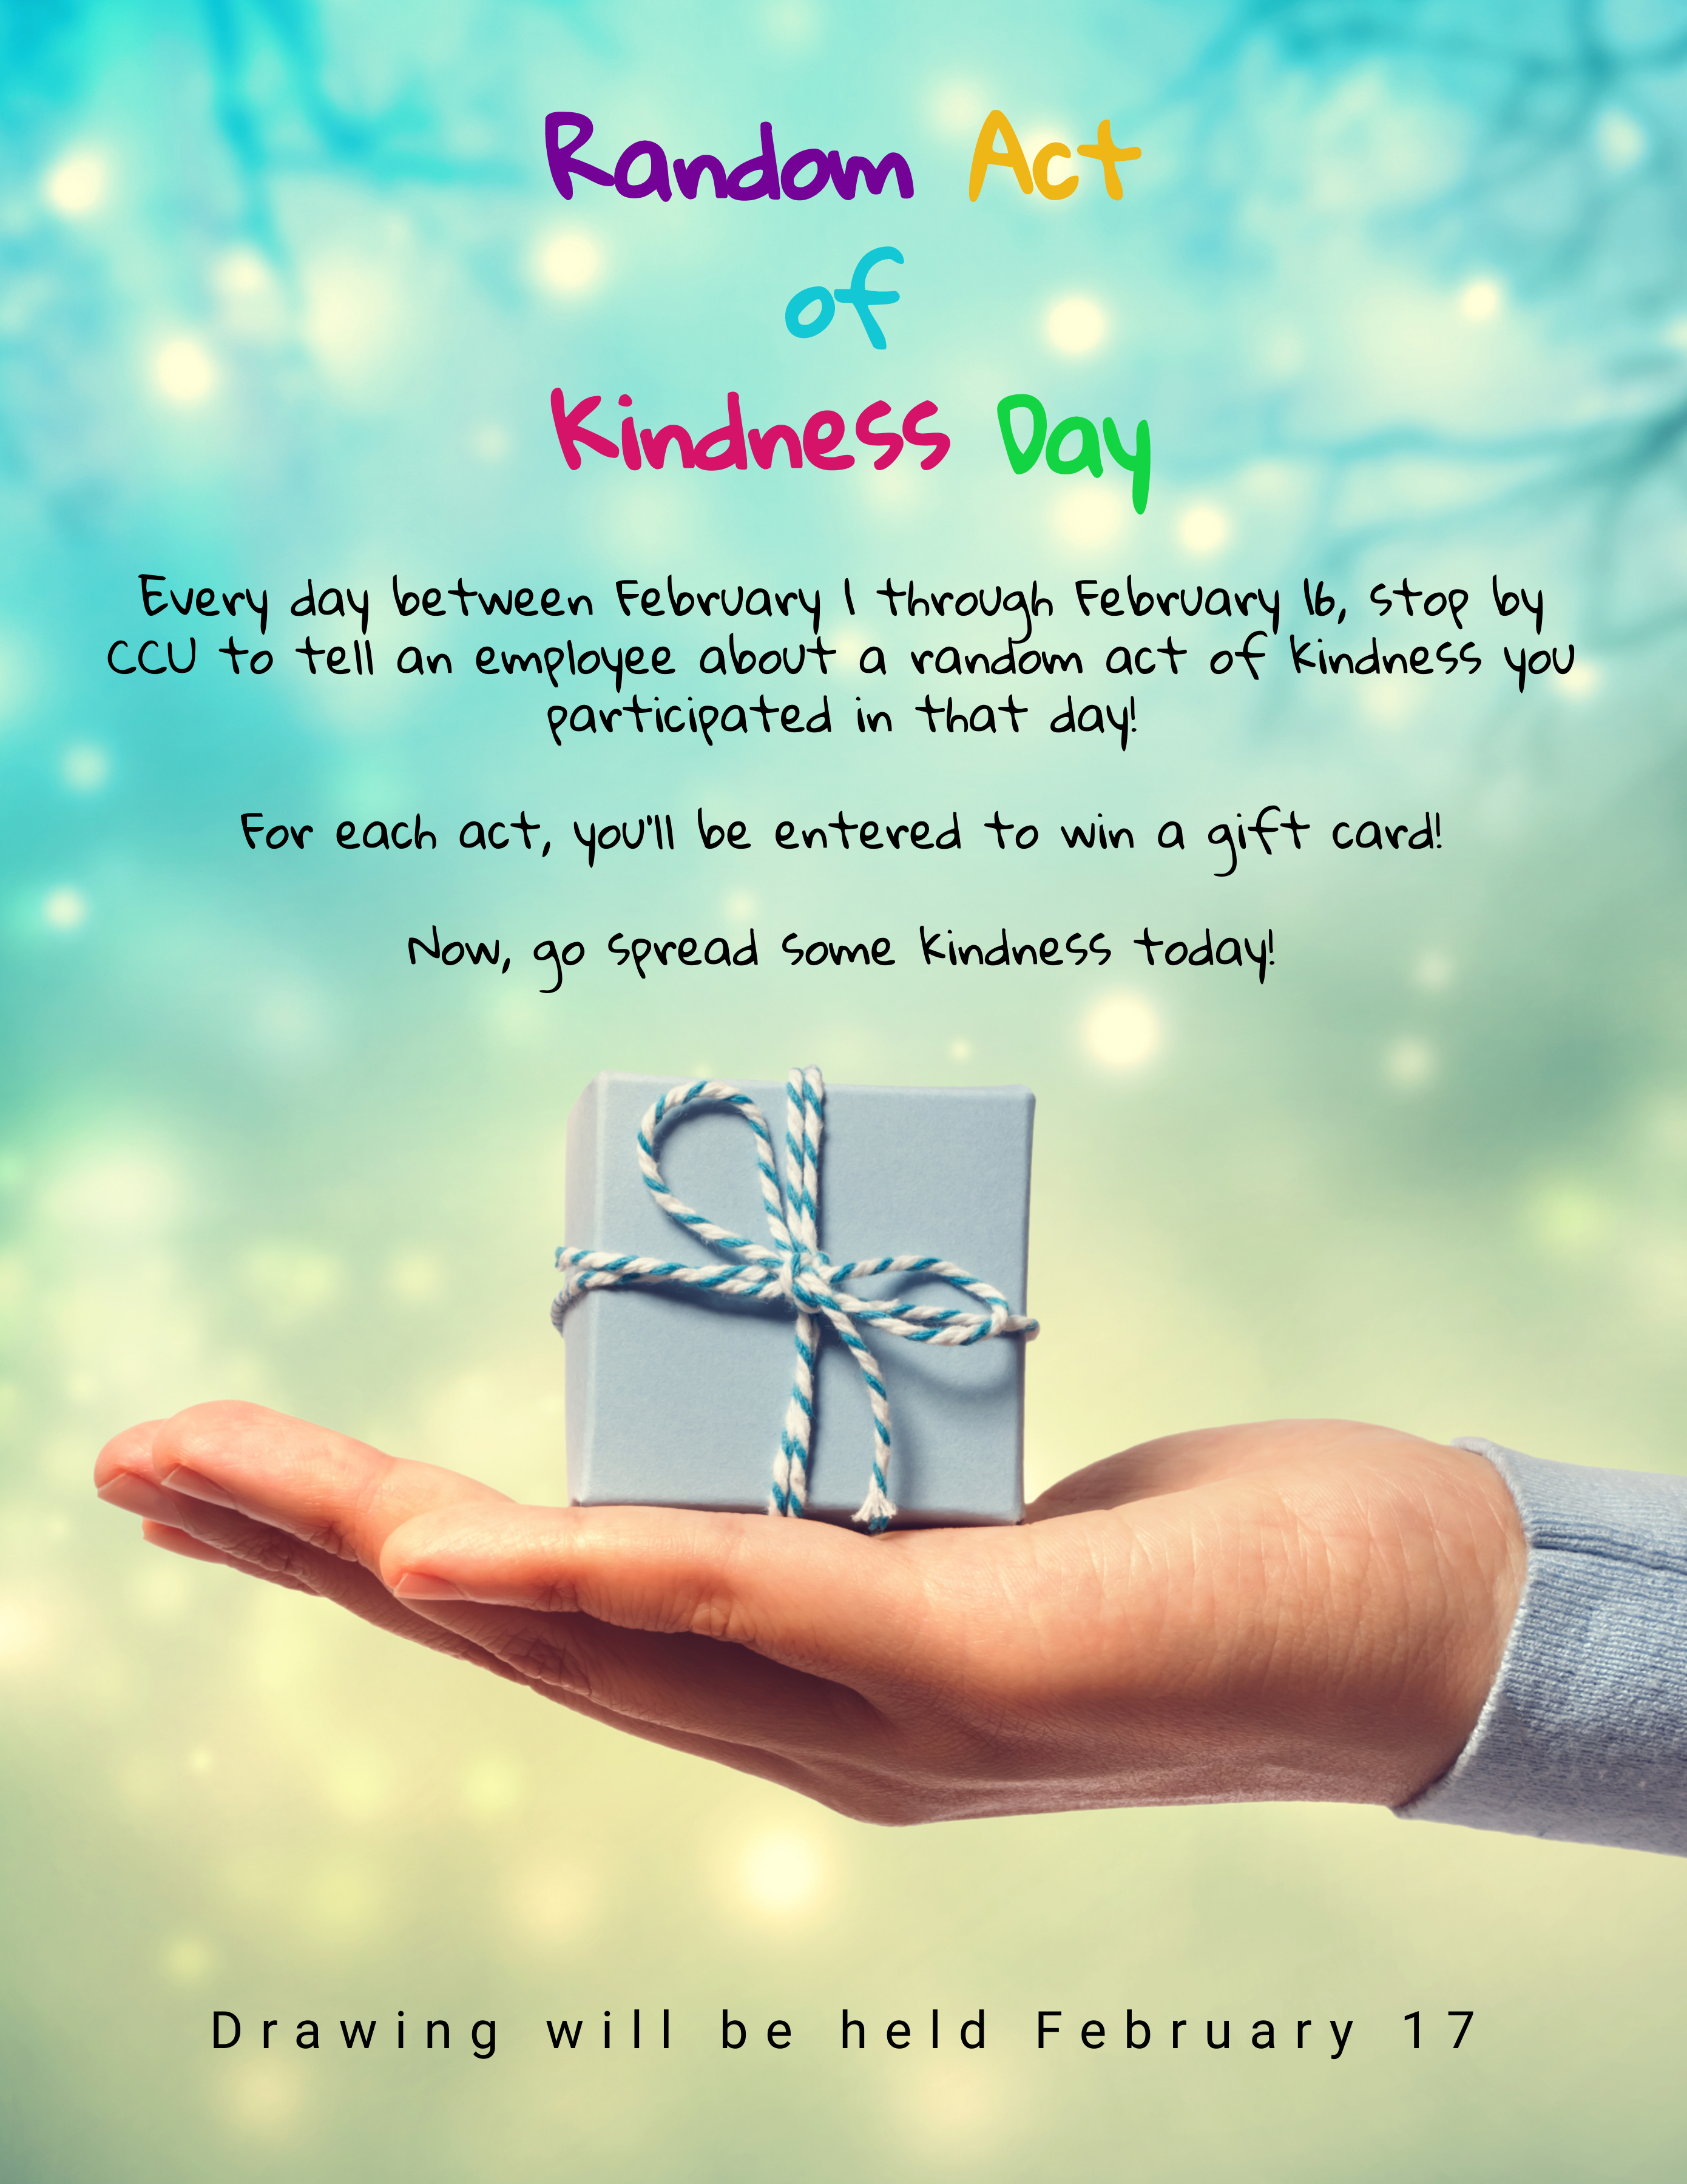 Text says 'Random Act of Kindness Day.  Every day between February 1 through February 16 stop by CCU to tell an employee about a random act of kindness you participated in that day!  For each act, you'll be entered to win a gift card!  Now, go spread some kindness today!  Drawing will be held February 17.'  Image of a hand holding a small blue gift box in the palm.  